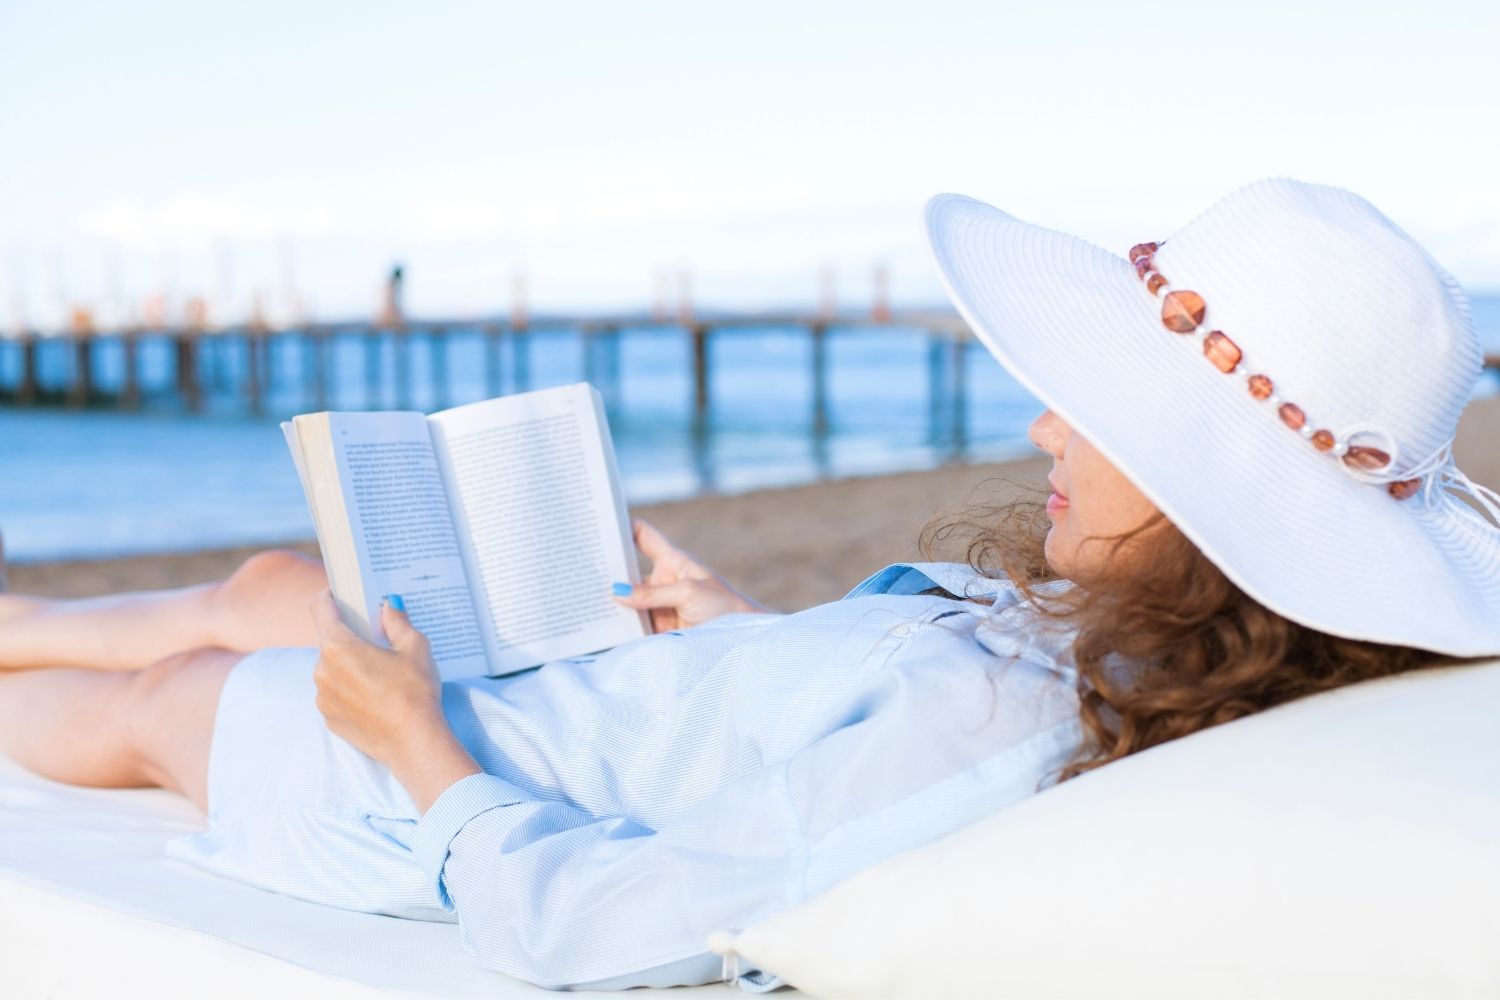 Lady reading a book on the beach.